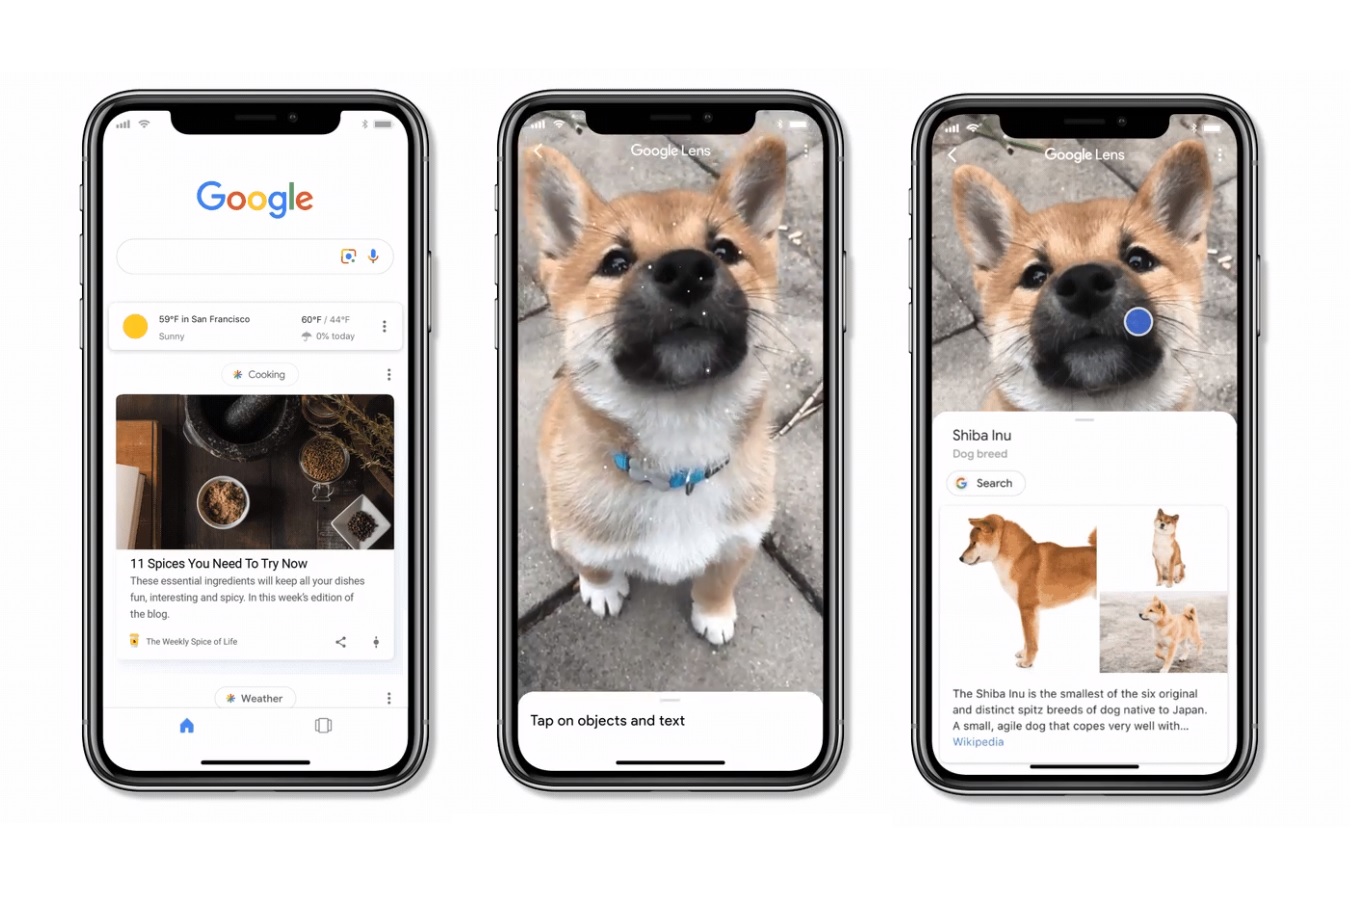 Google Lens Launched in iOS App / Digital Information World